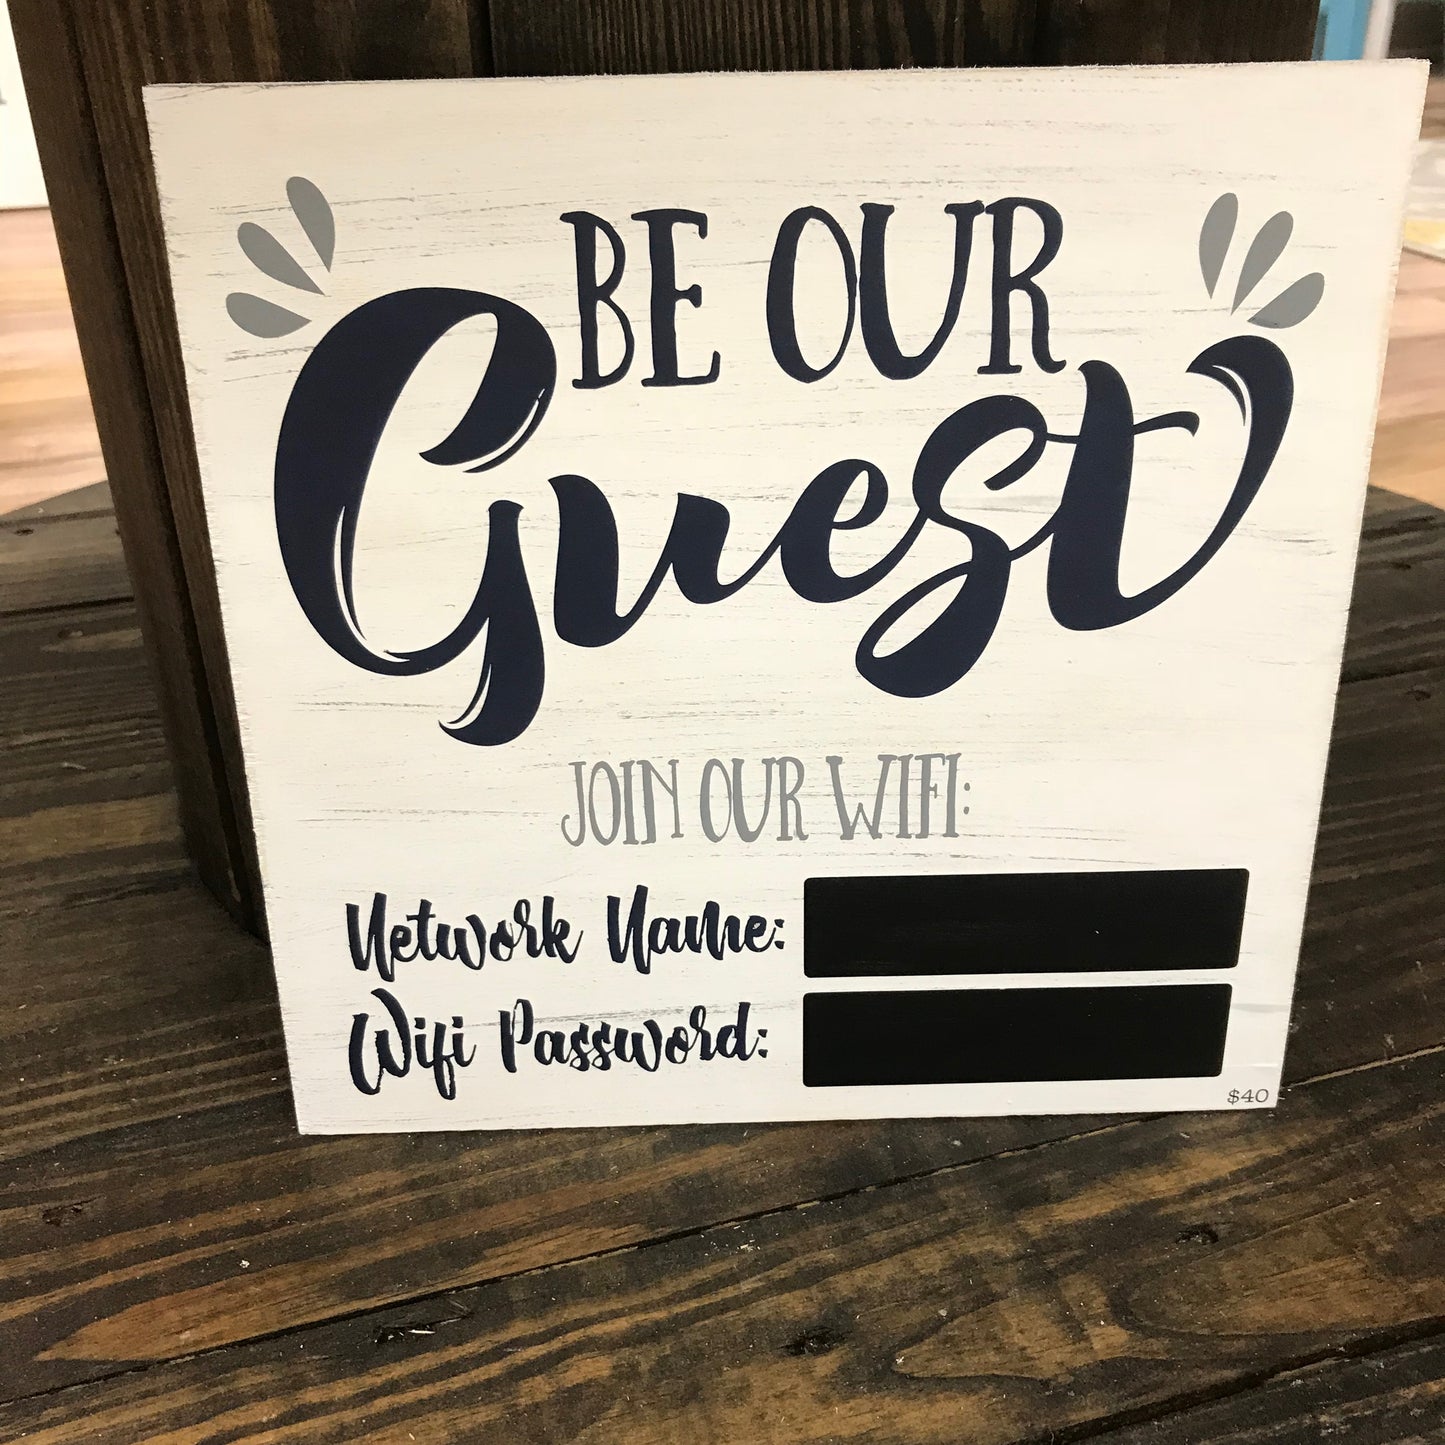 Be our guest -wifi